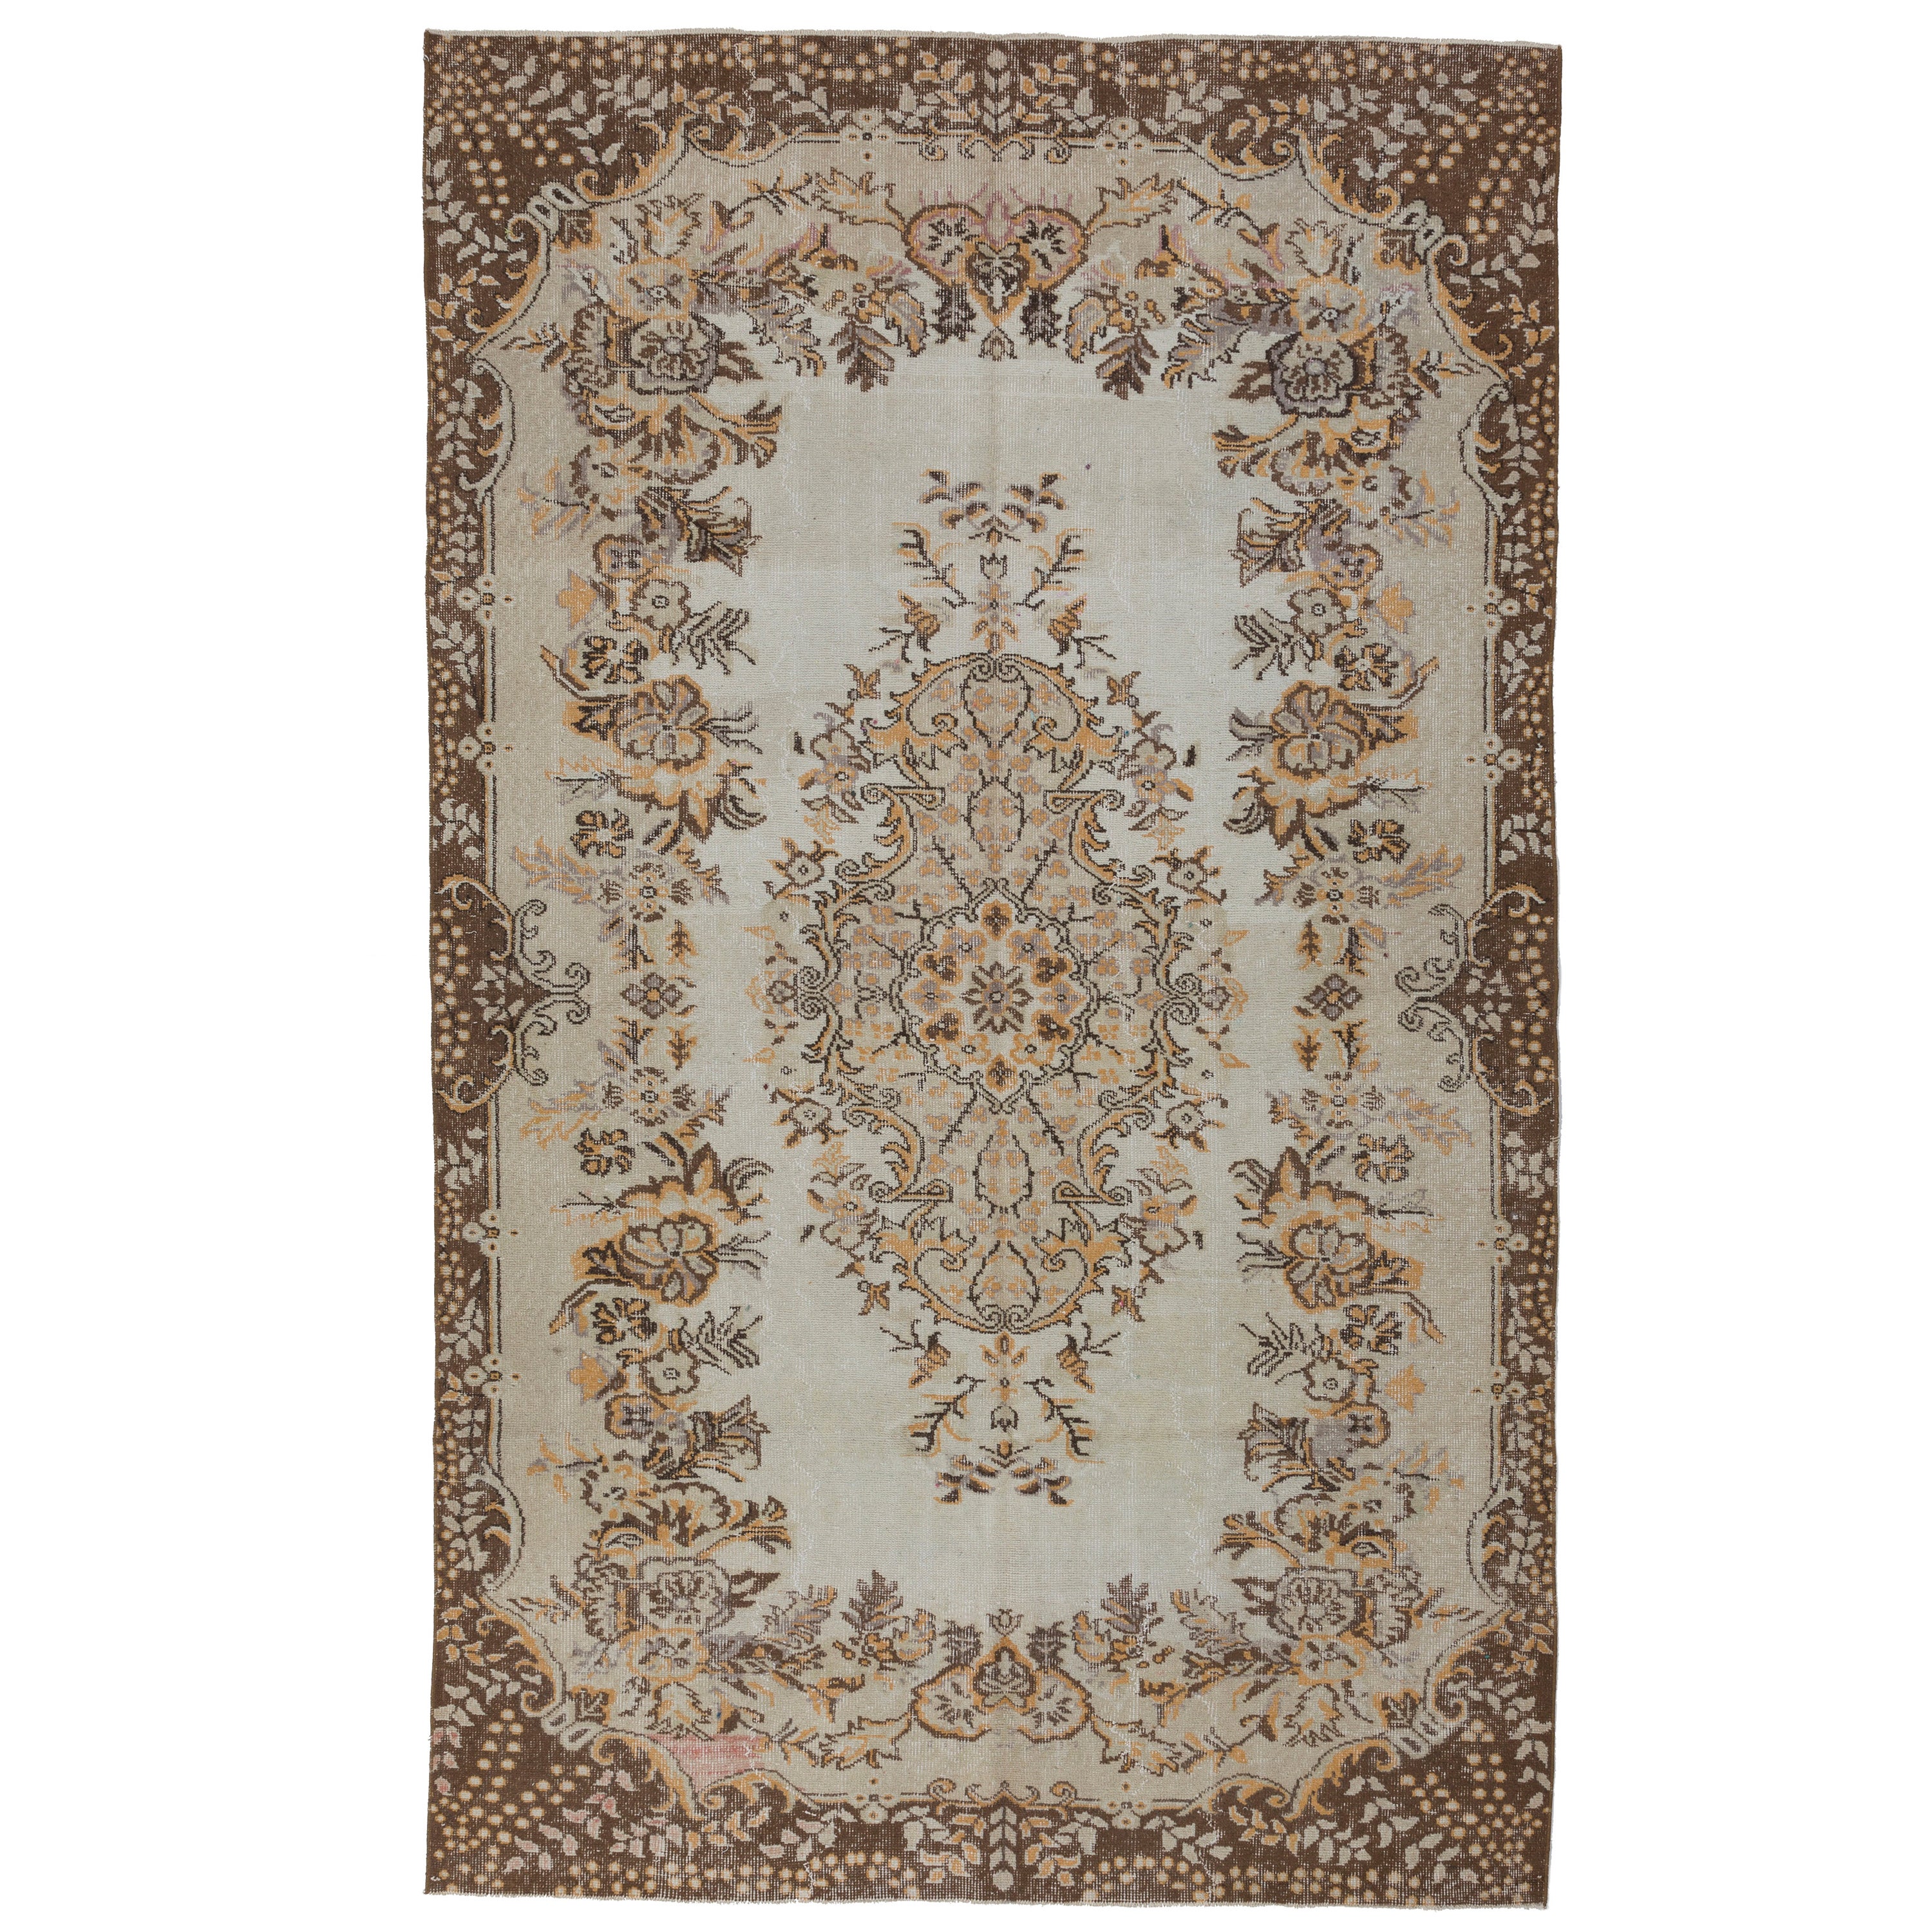 6x9.7 Ft Vintage Turkish Wool Rug, Rustic Country House Style, Handmade Carpet For Sale